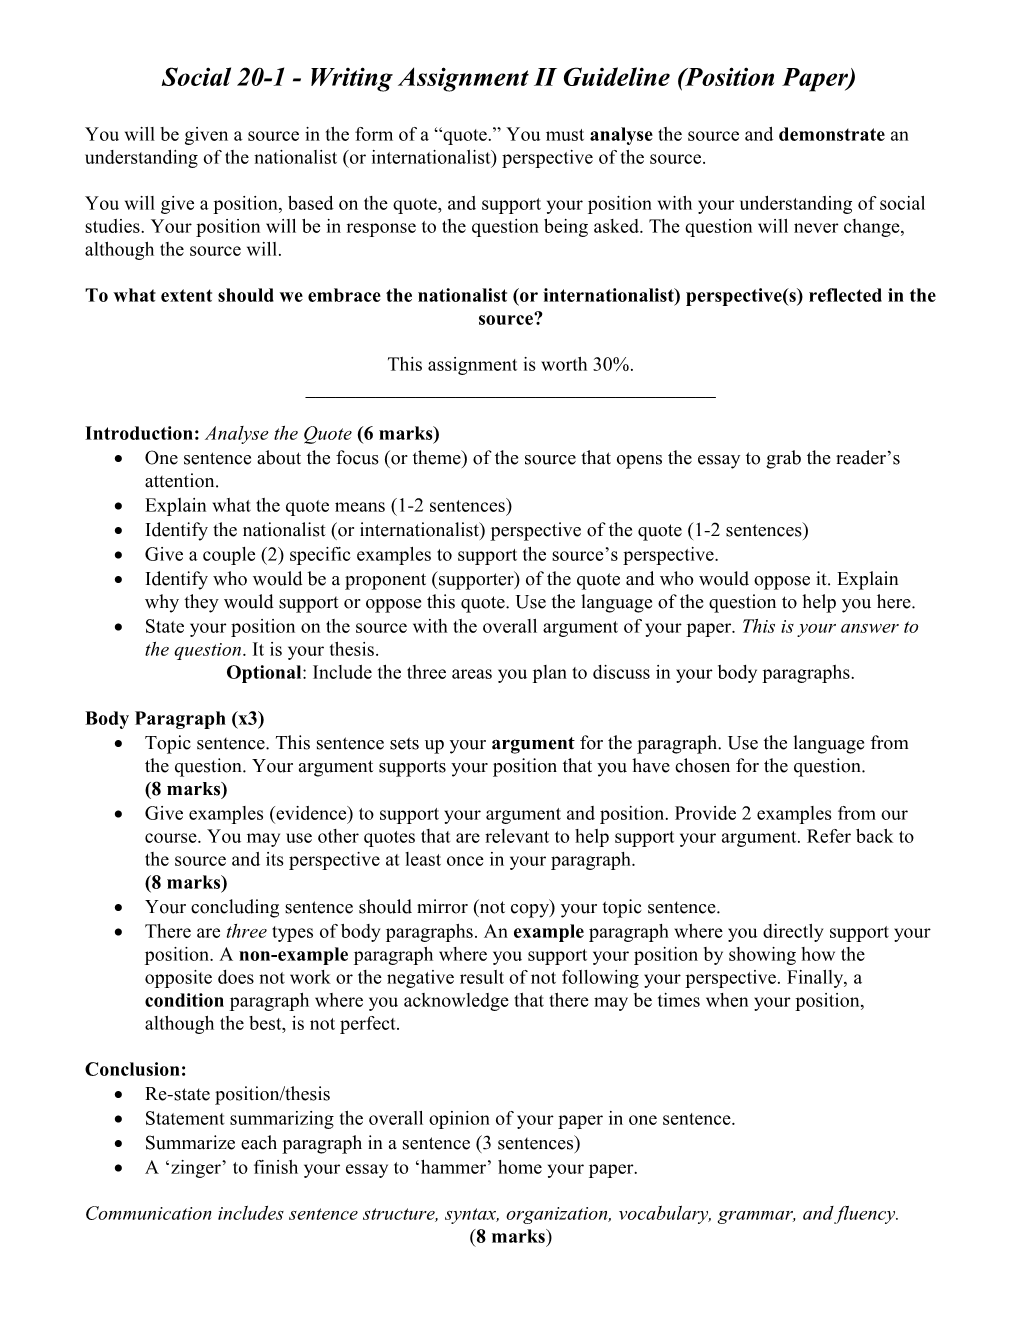 Social 20-1 - Writing Assignment II Guideline (Position Paper)